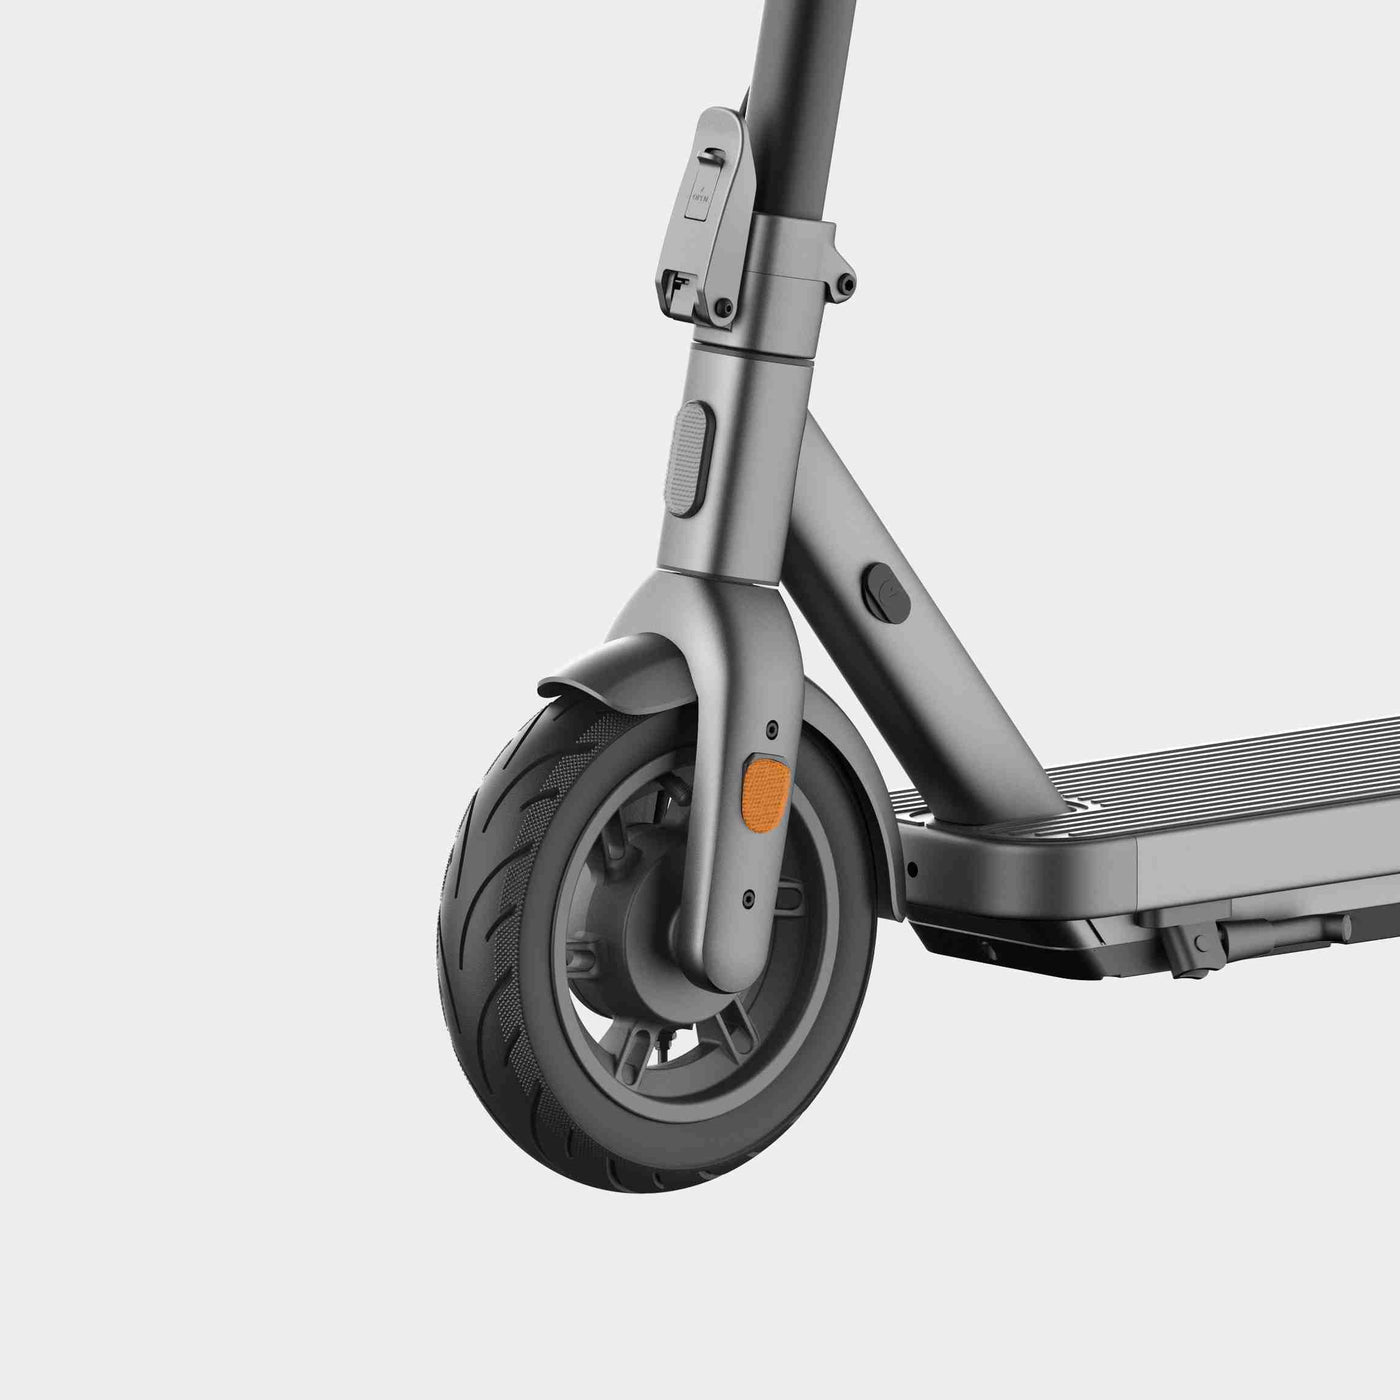 Blutron One Plus S65 | 800W 20Mph 40Miles Electric Scooter